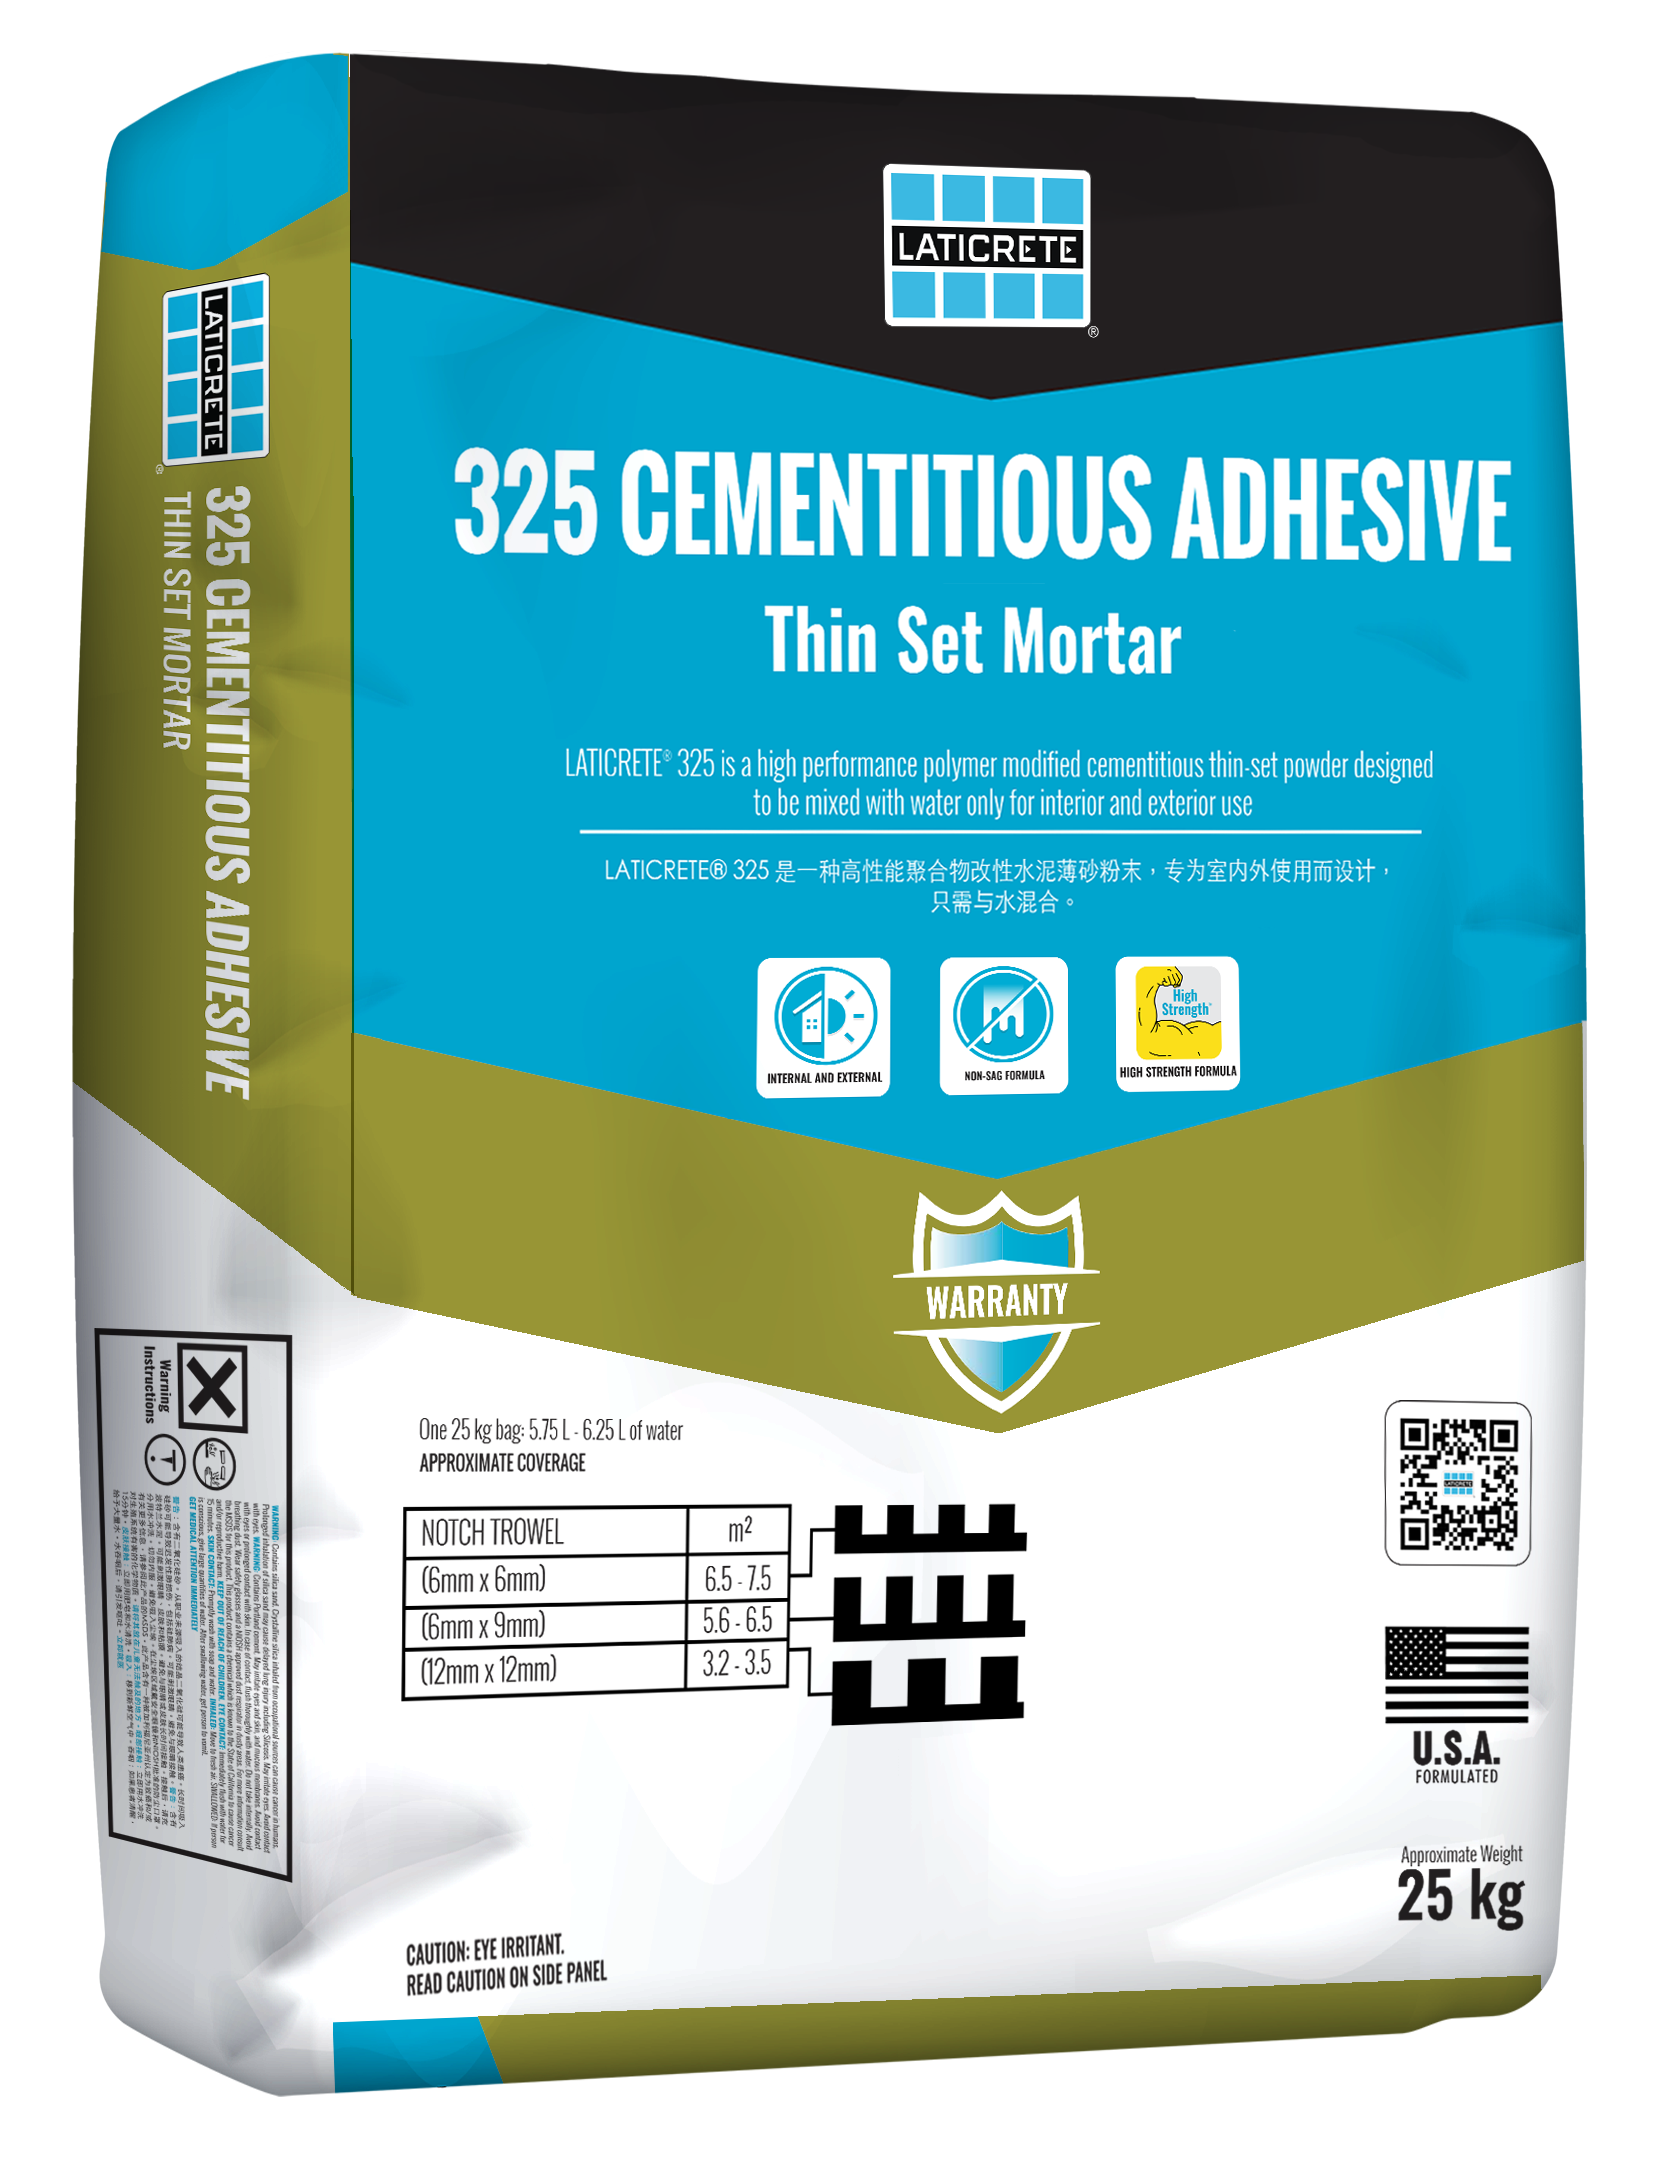 325 Cementitious Adhesive